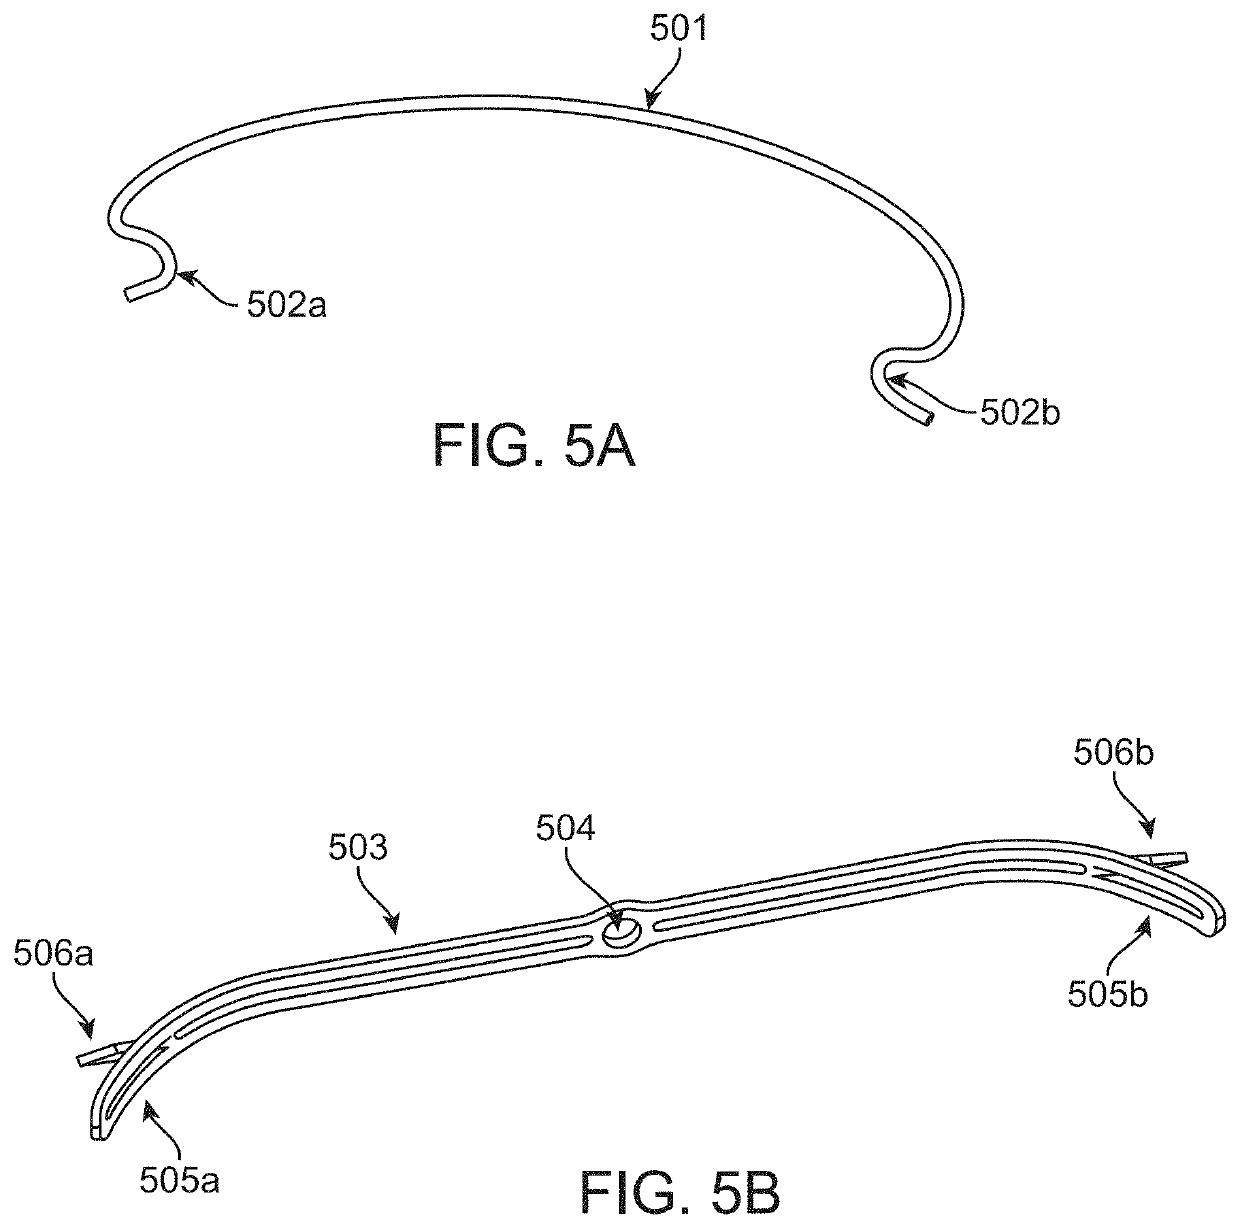 Methods and devices for heart valve repair